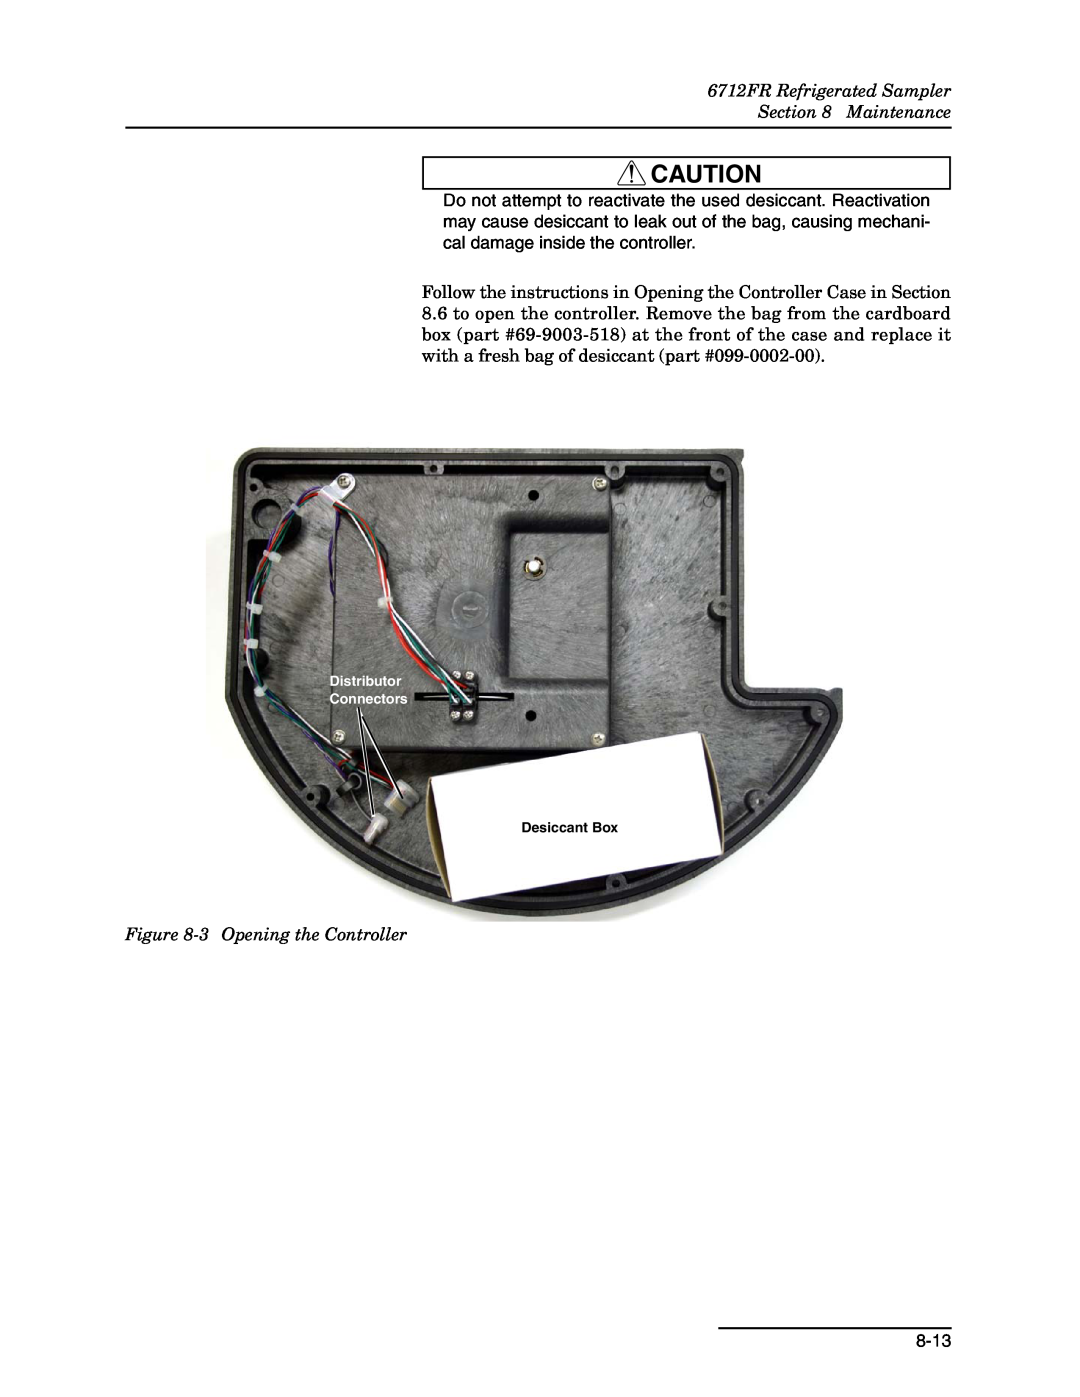 Teledyne 6712FR Refrigerated Sampler Maintenance, Follow the instructions in Opening the Controller Case in Section 